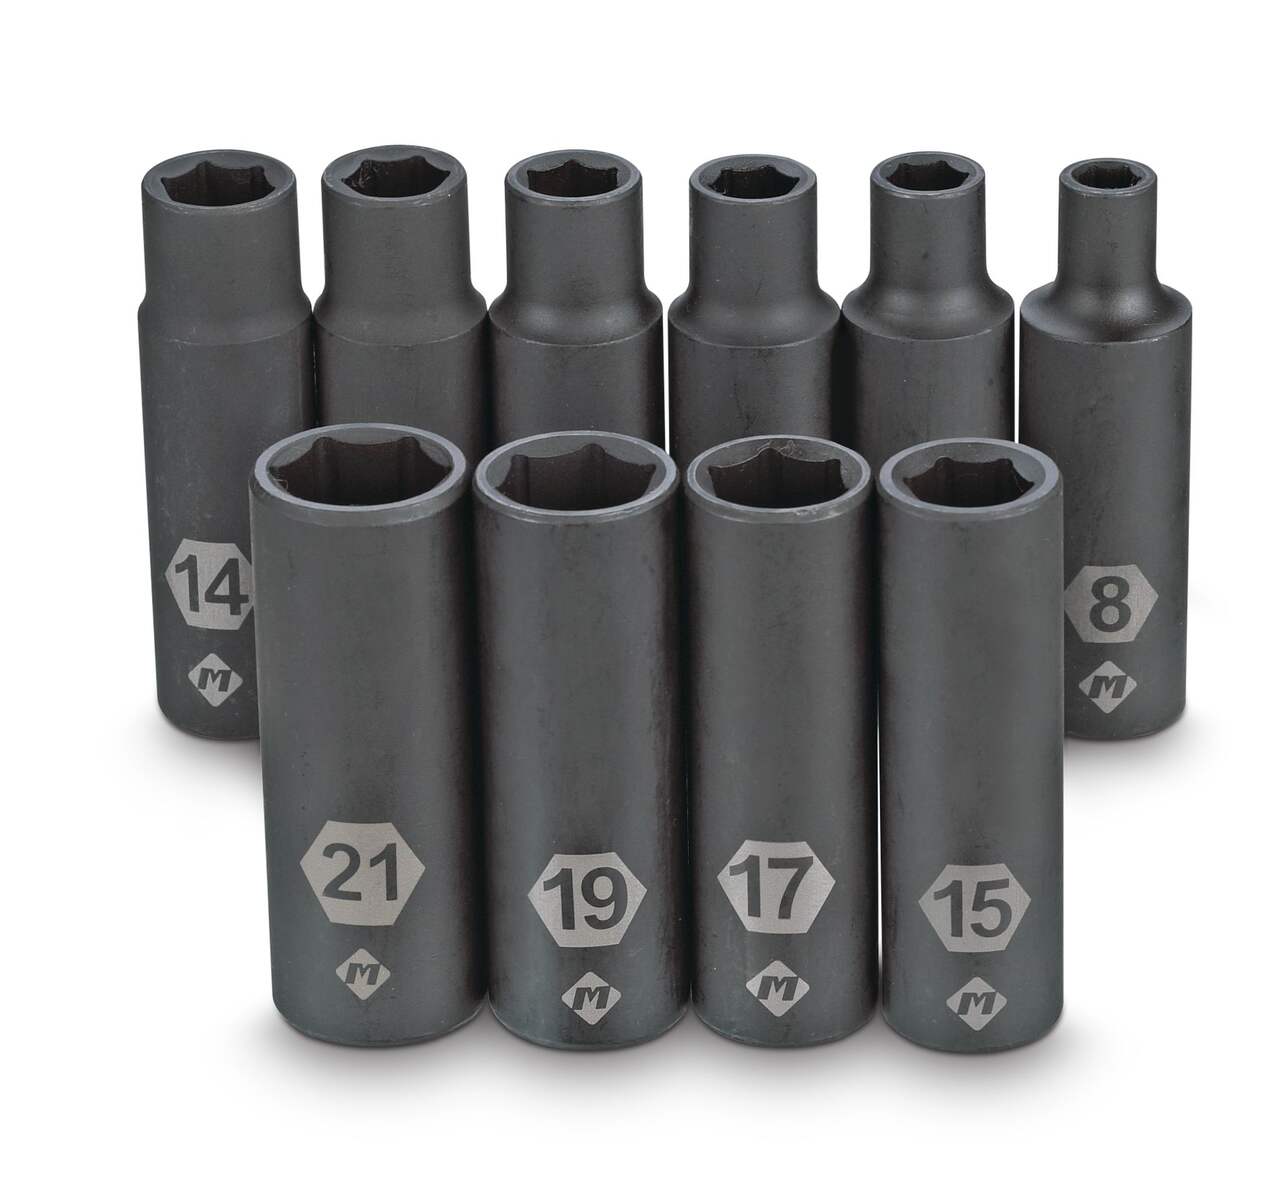 https://media-www.canadiantire.ca/product/fixing/tools/sockets-wrenches/0587496/maximum-deep-impact-socket-11pc-1-2-sae-2134b447-cade-4bf7-803b-23de53055a93-jpgrendition.jpg?imdensity=1&imwidth=640&impolicy=mZoom